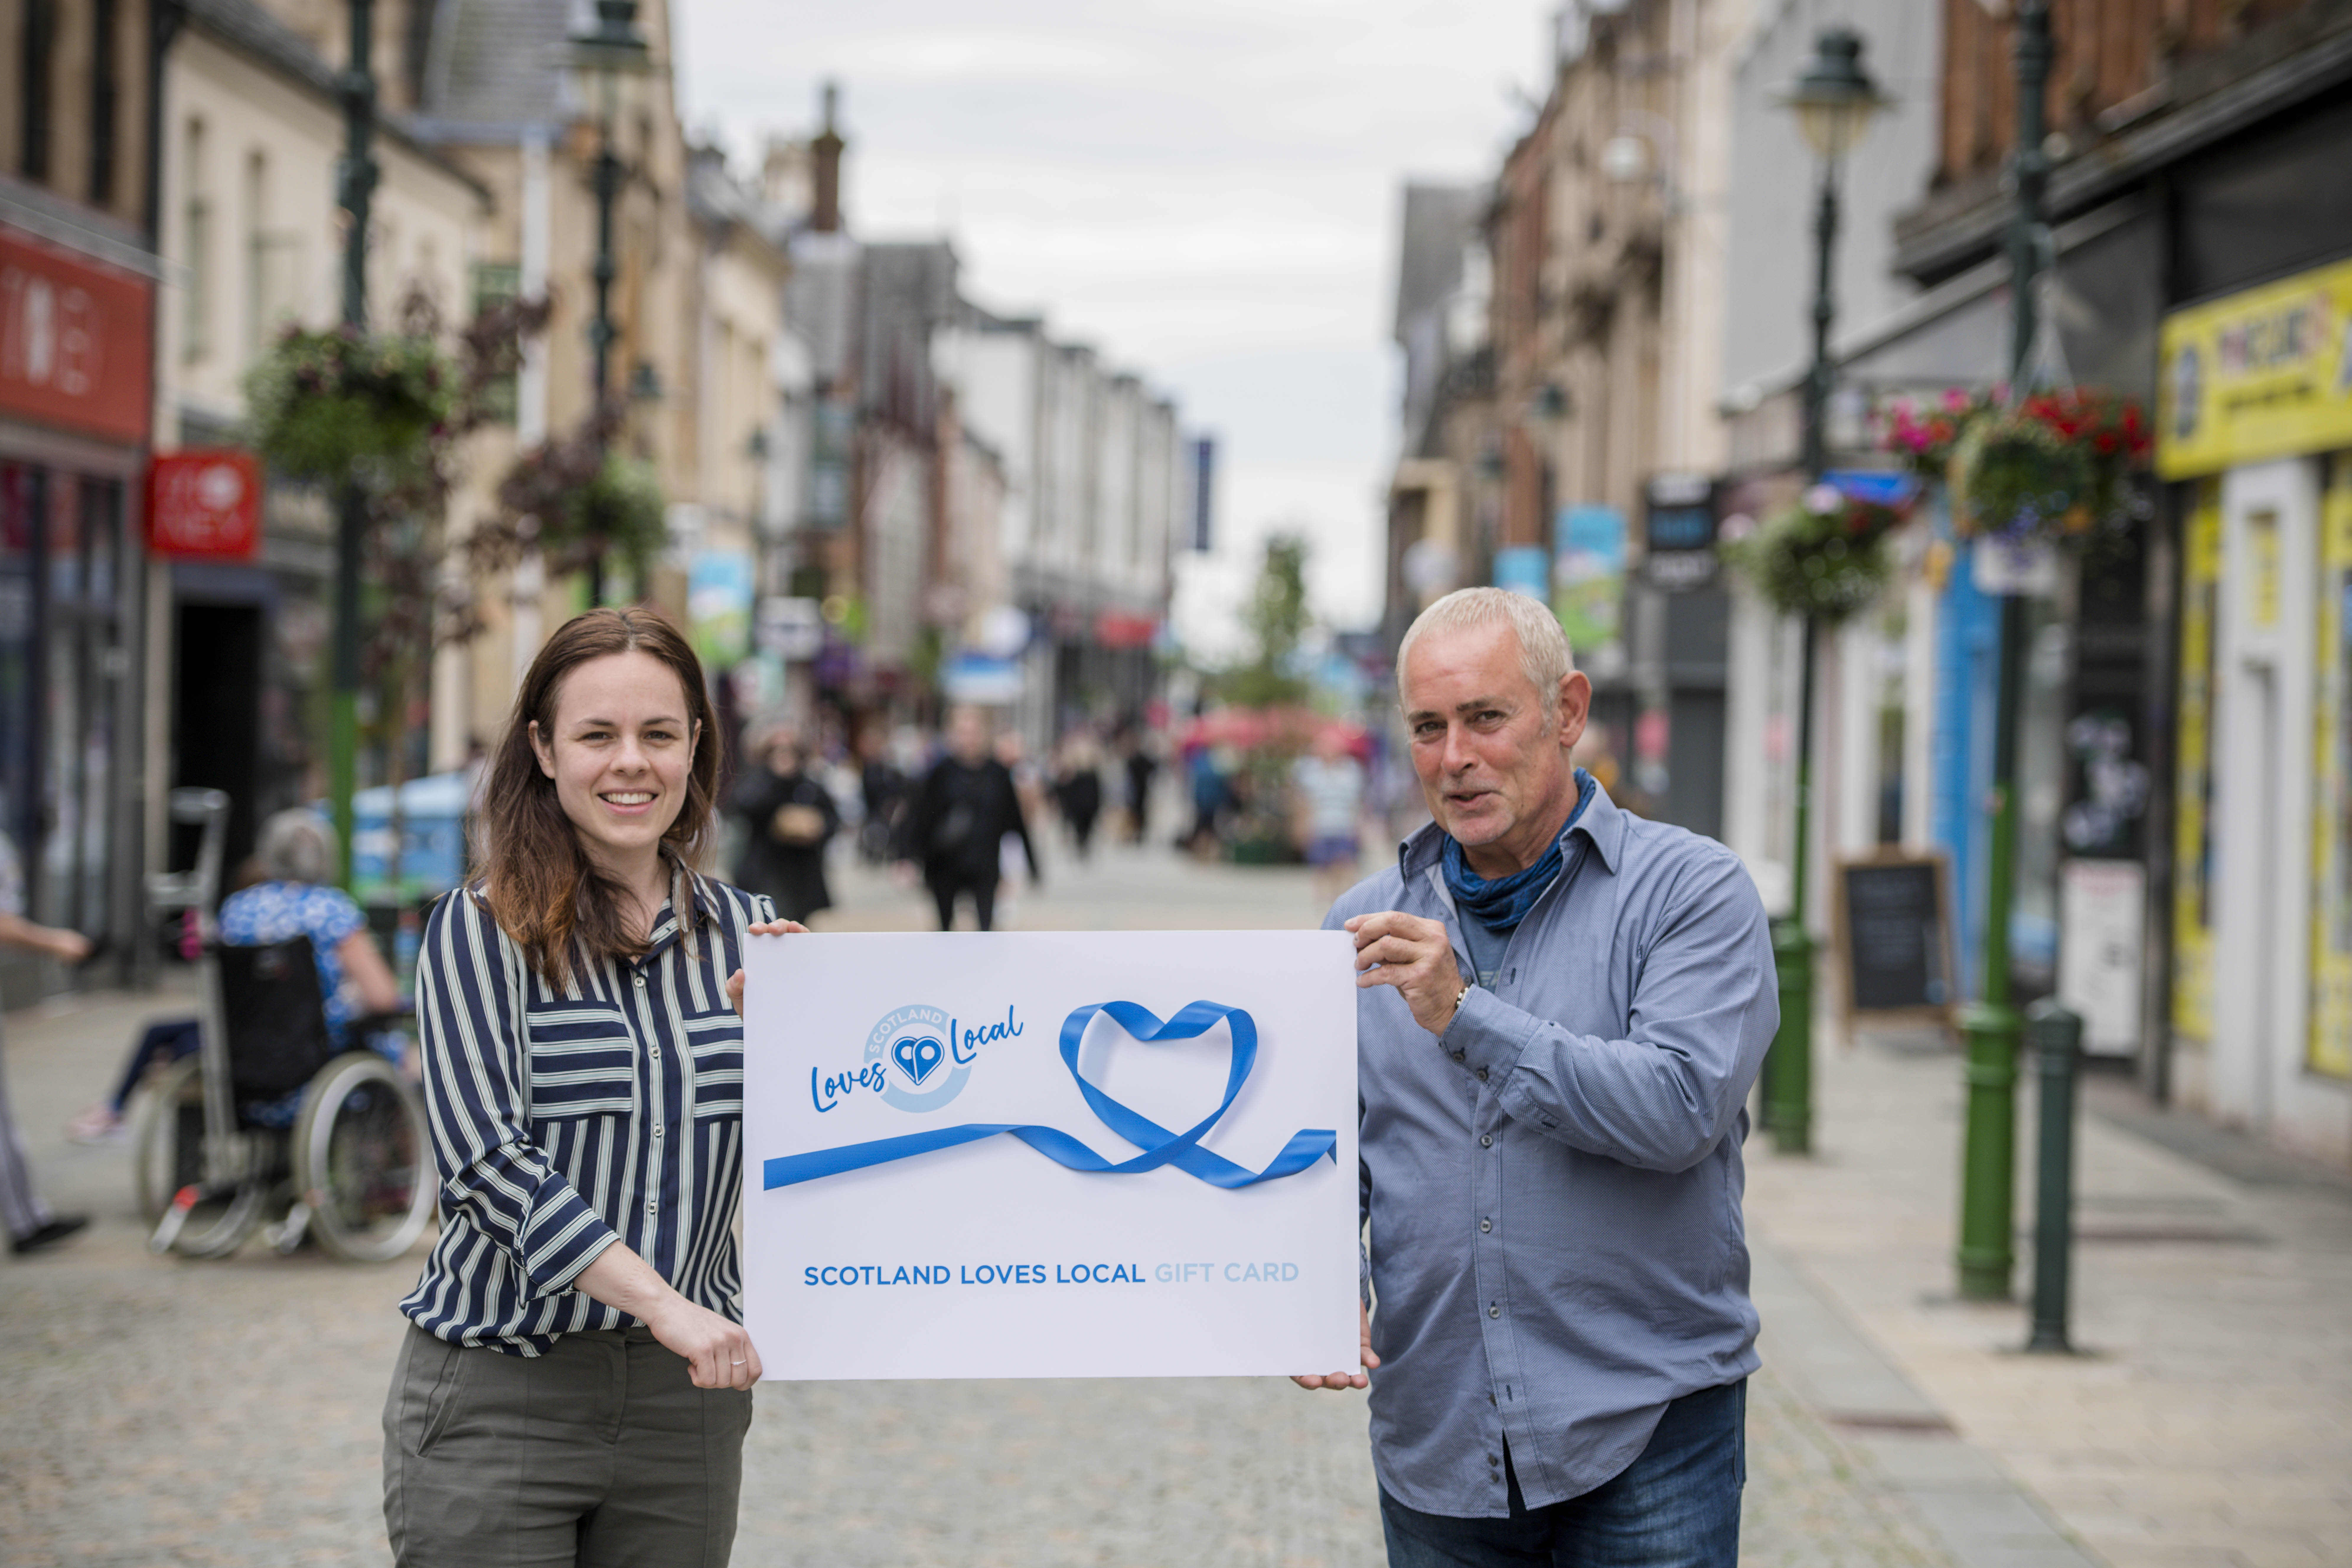 Economy secretary Kate Forbes shows support for Scotland Loves Local gift card